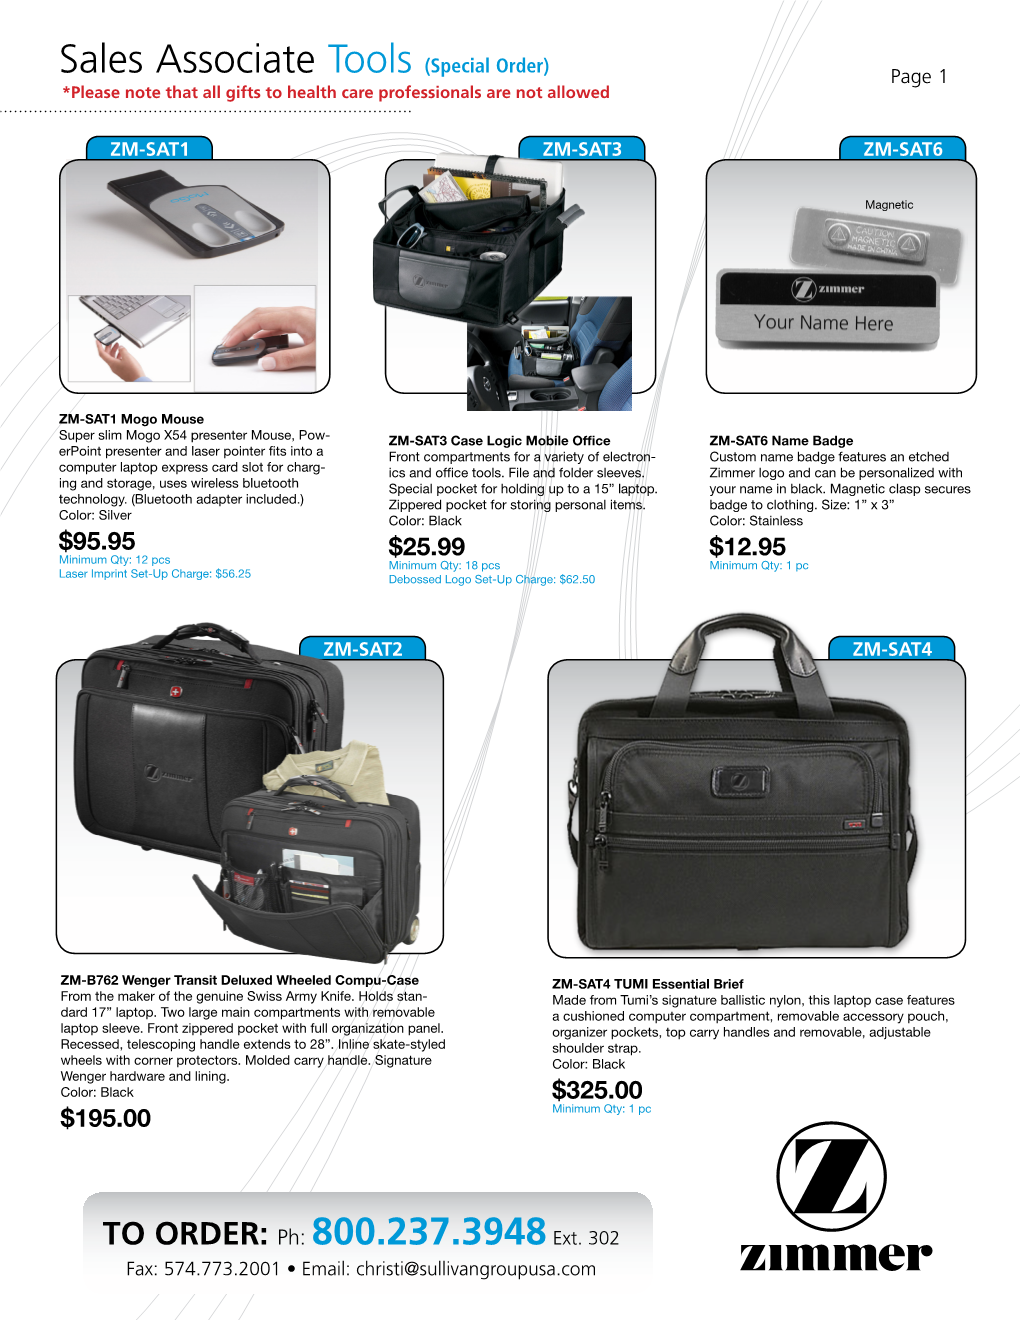 Sales Associate Tools Page 1 *Please Note That All Gifts to Health Care Professionals Are Not Allowed